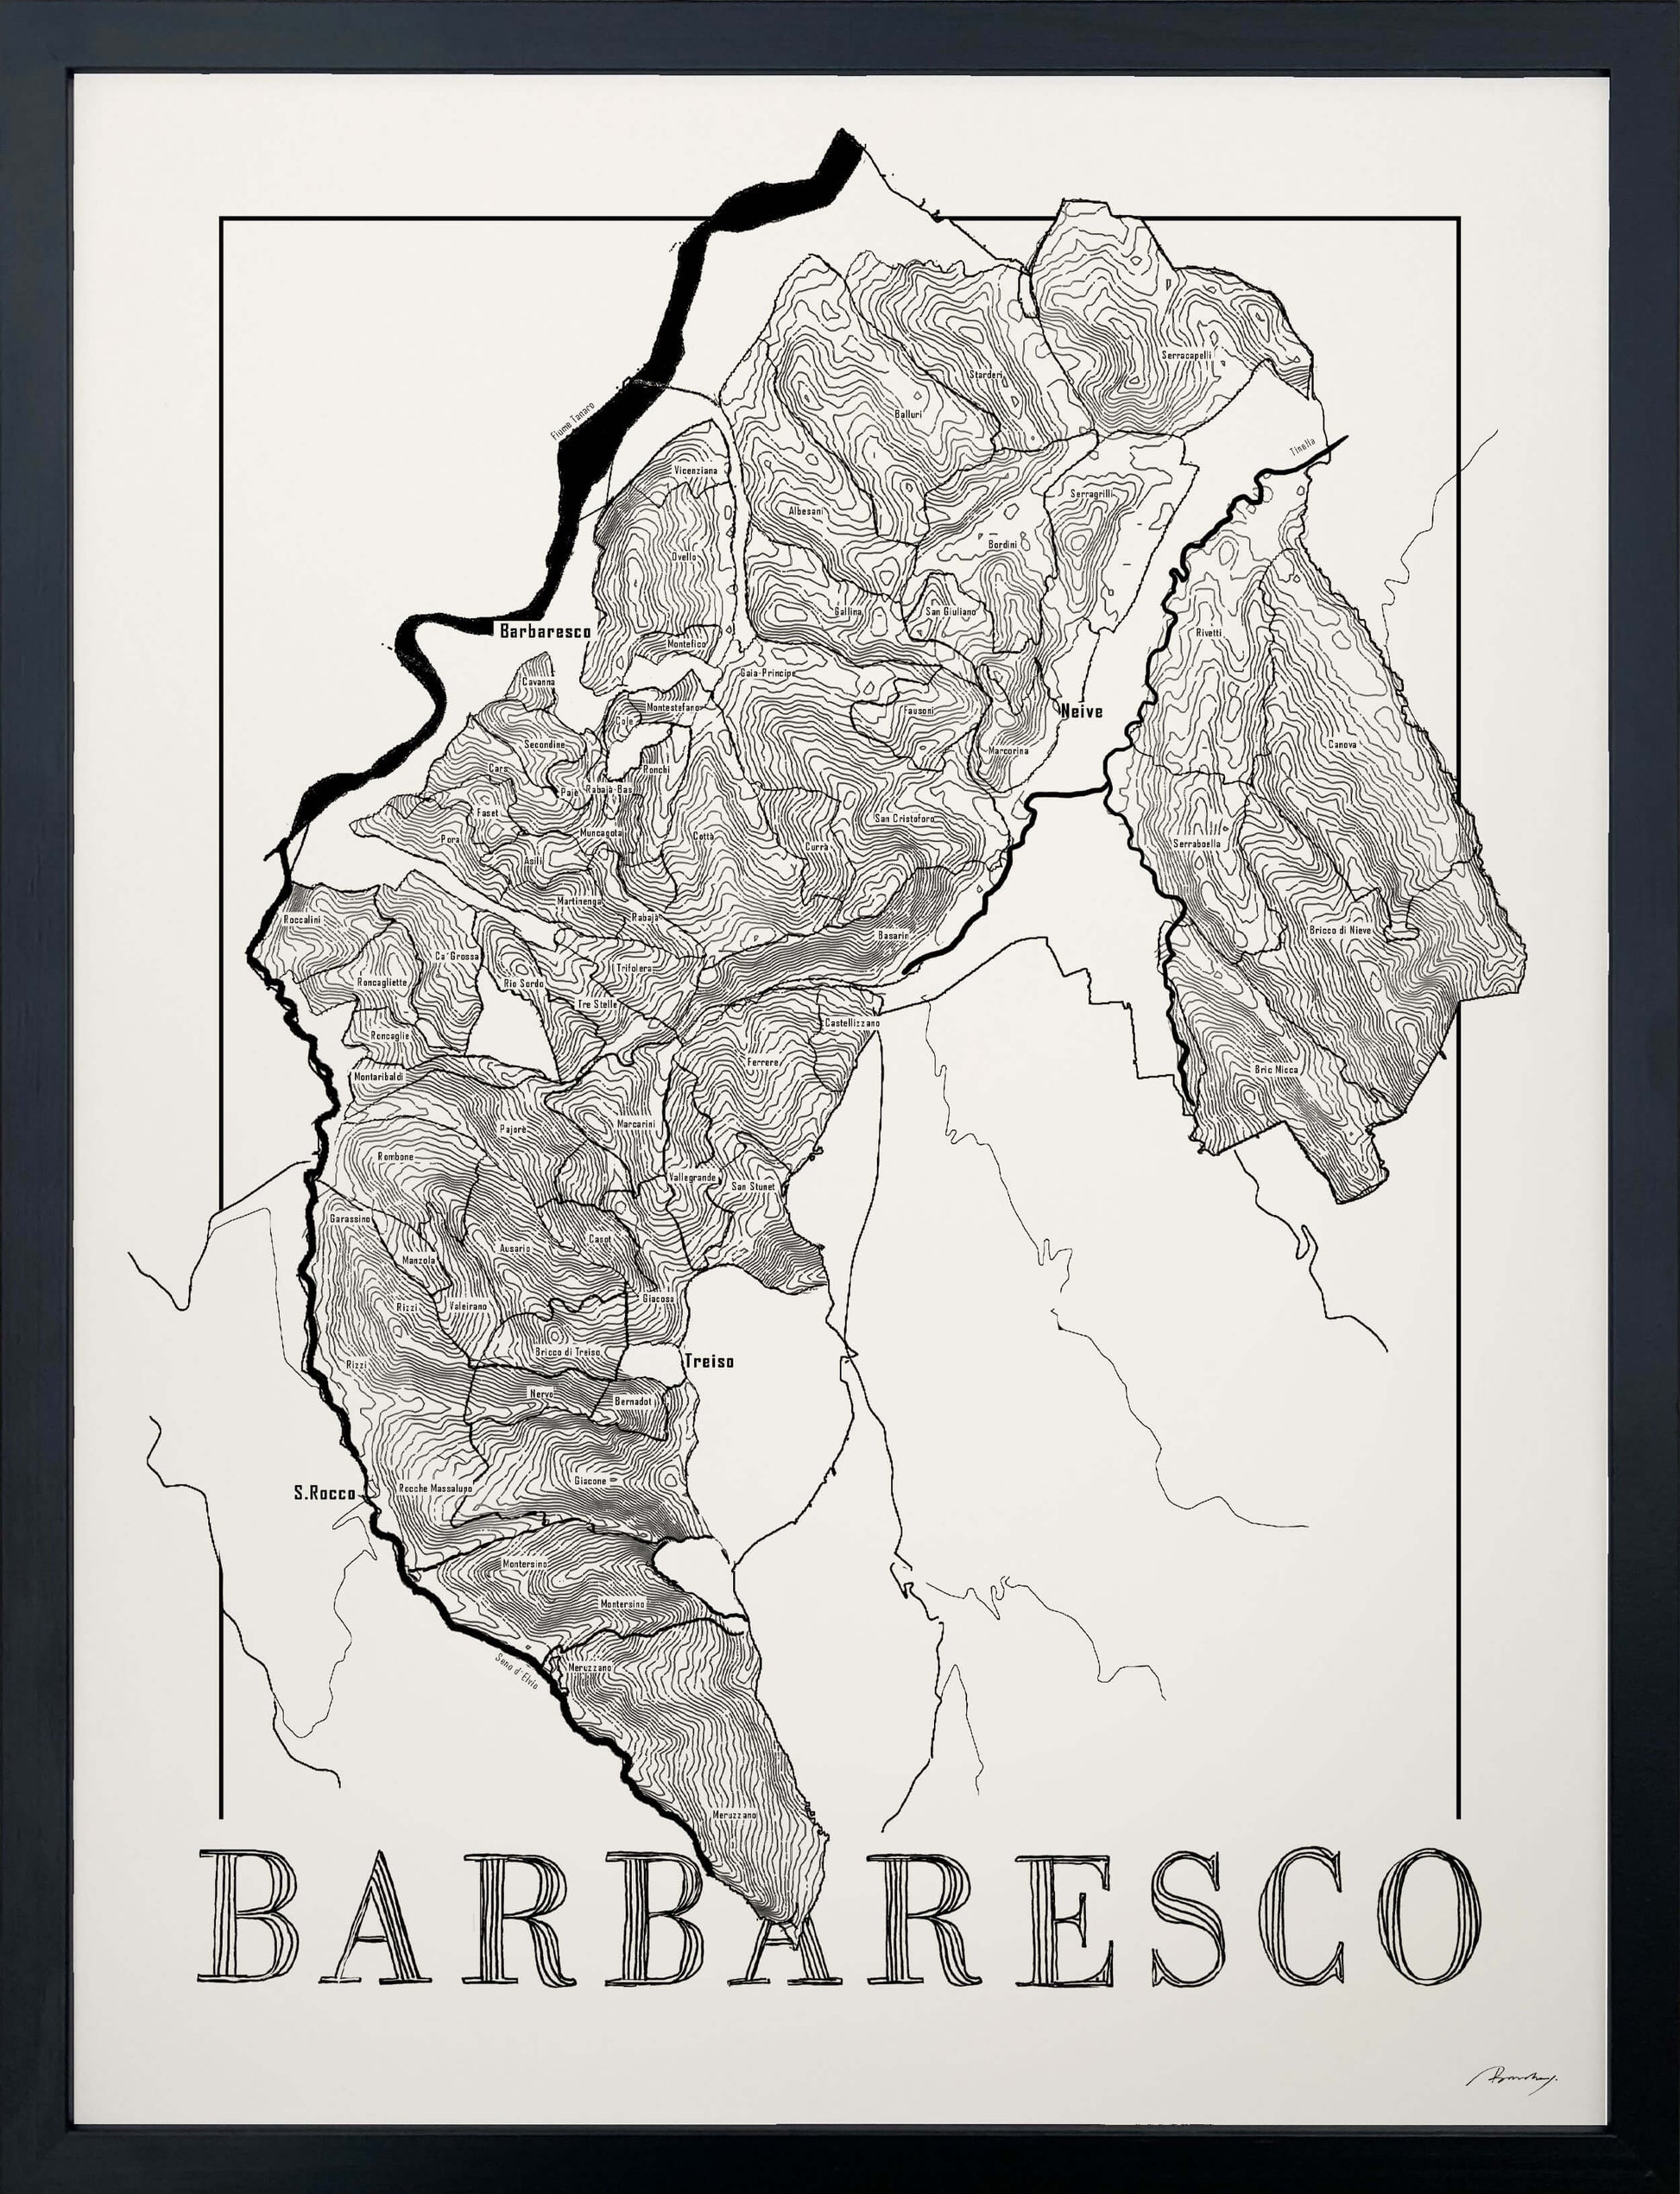 Barbaresco Wine map poster. Exclusive wine map posters. Premium quality wine maps printed on environmentally friendly FSC marked paper. 